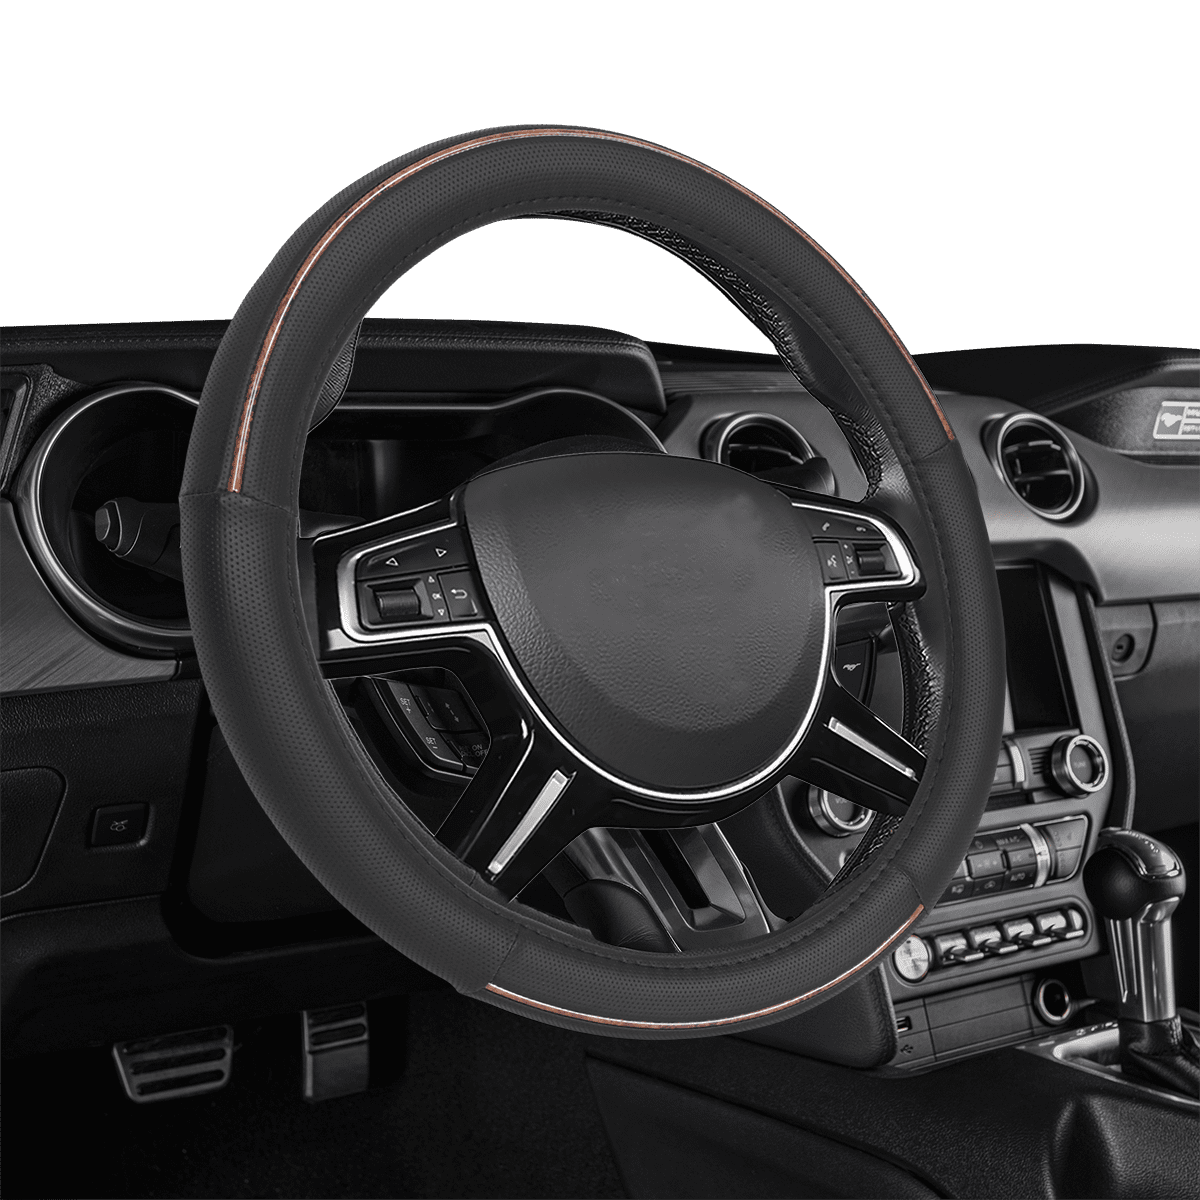 Universal 13-18 Inch PU Leather steering wheel cover